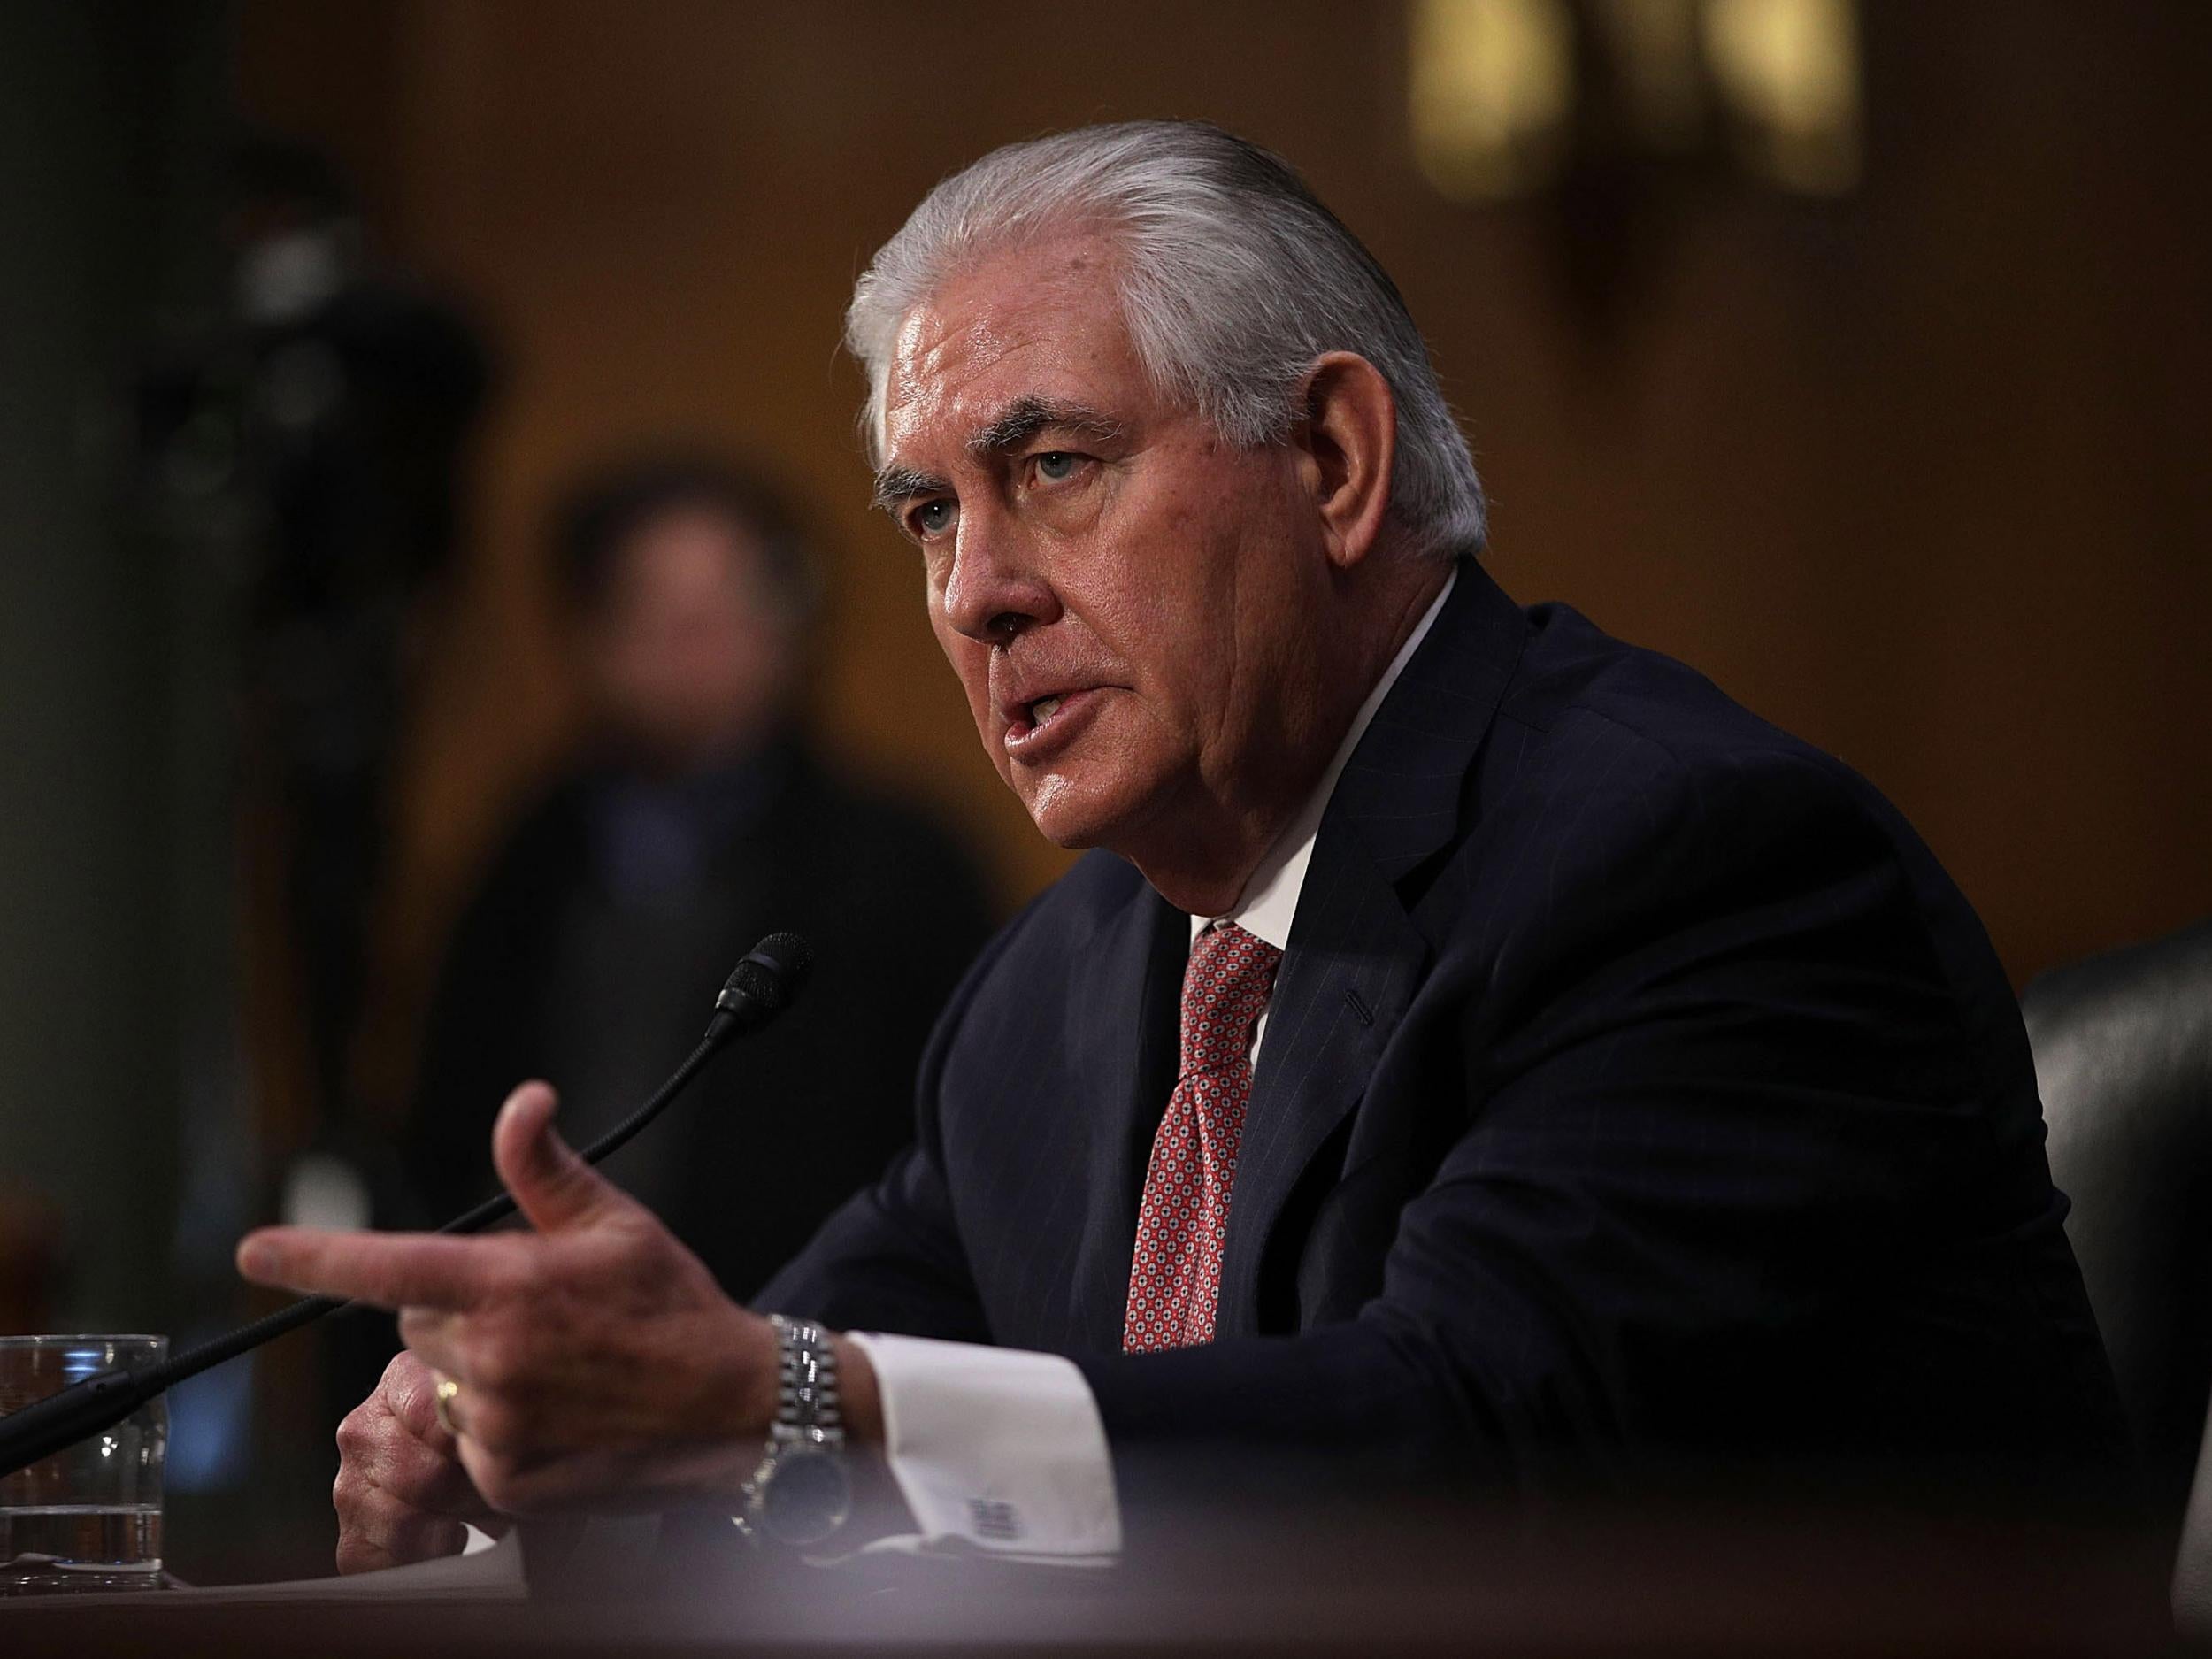 Rex Tillerson was present at the State Department offices when the officials resigned